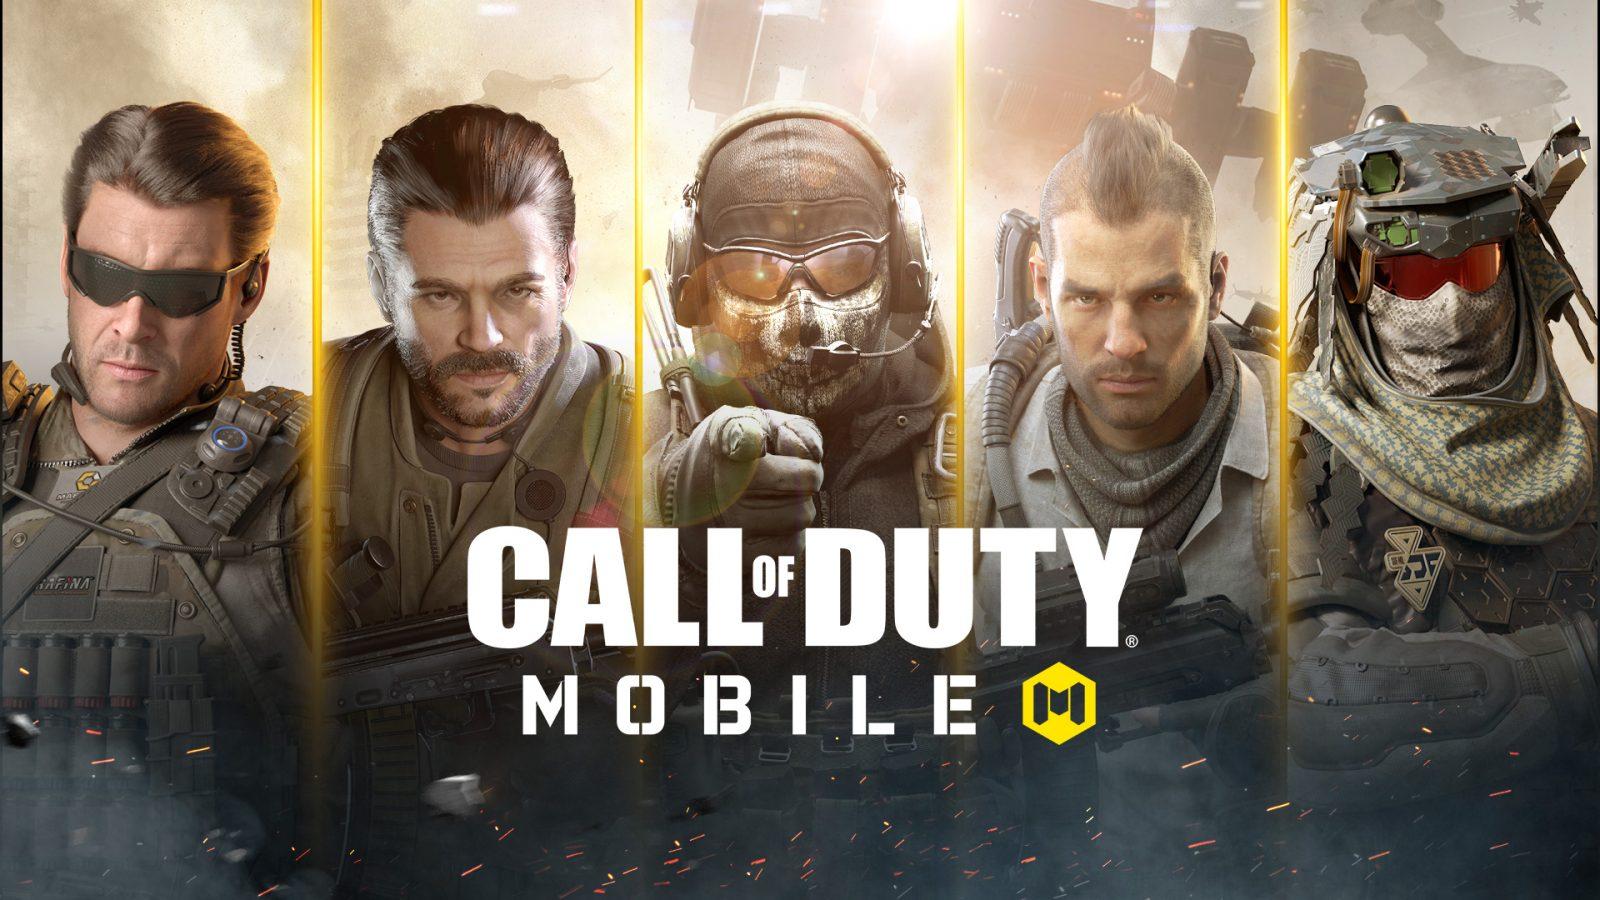 How to Login Call of Duty Mobile Account 2023? Call of Duty Mobile